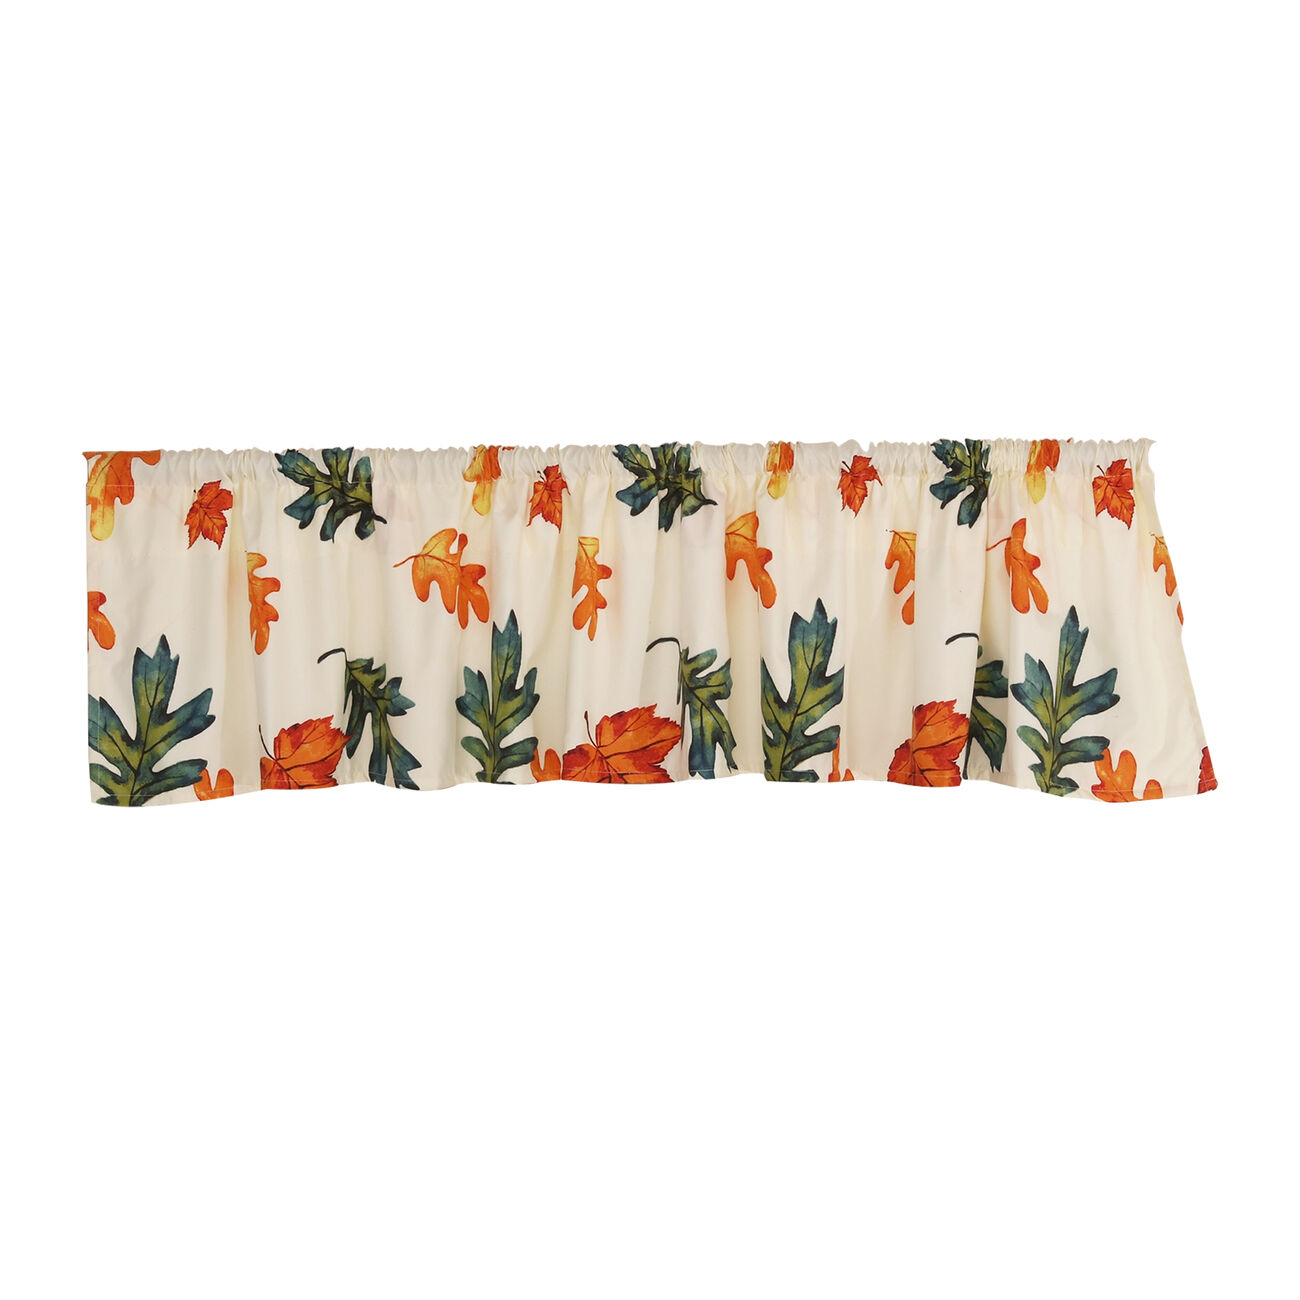 Lined Polyester Valance with Floral Prints and 2 Inch Header, Multicolor